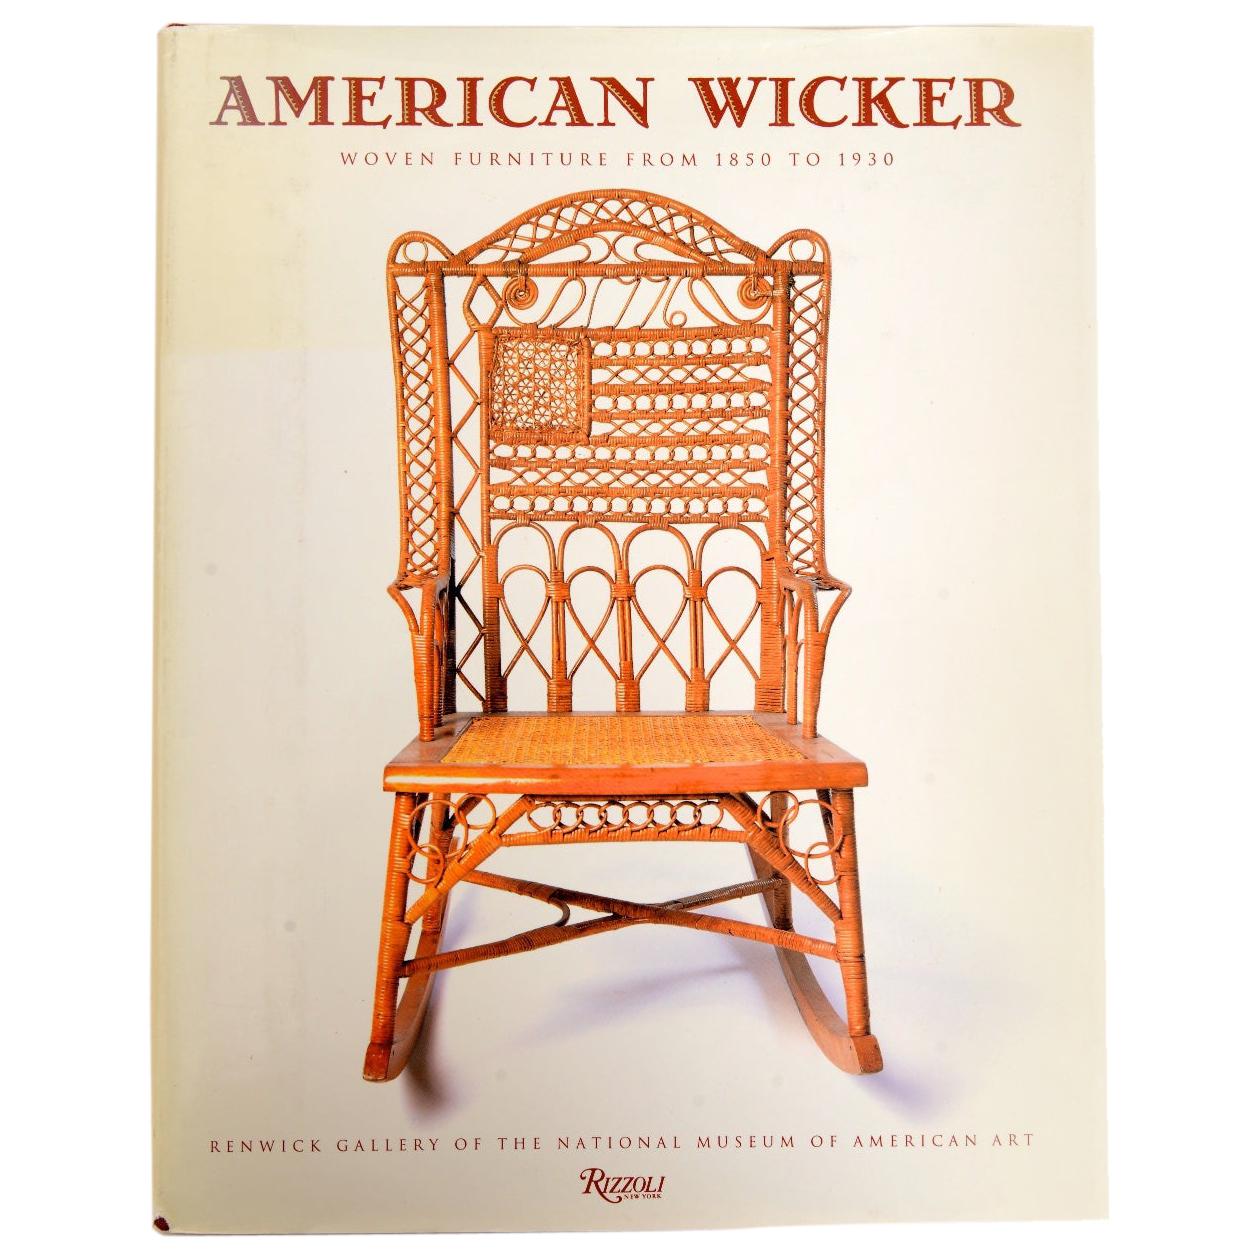 American Wicker Woven Furniture from 1850 to 1930 by Jeremy Adamson, 1st Ed